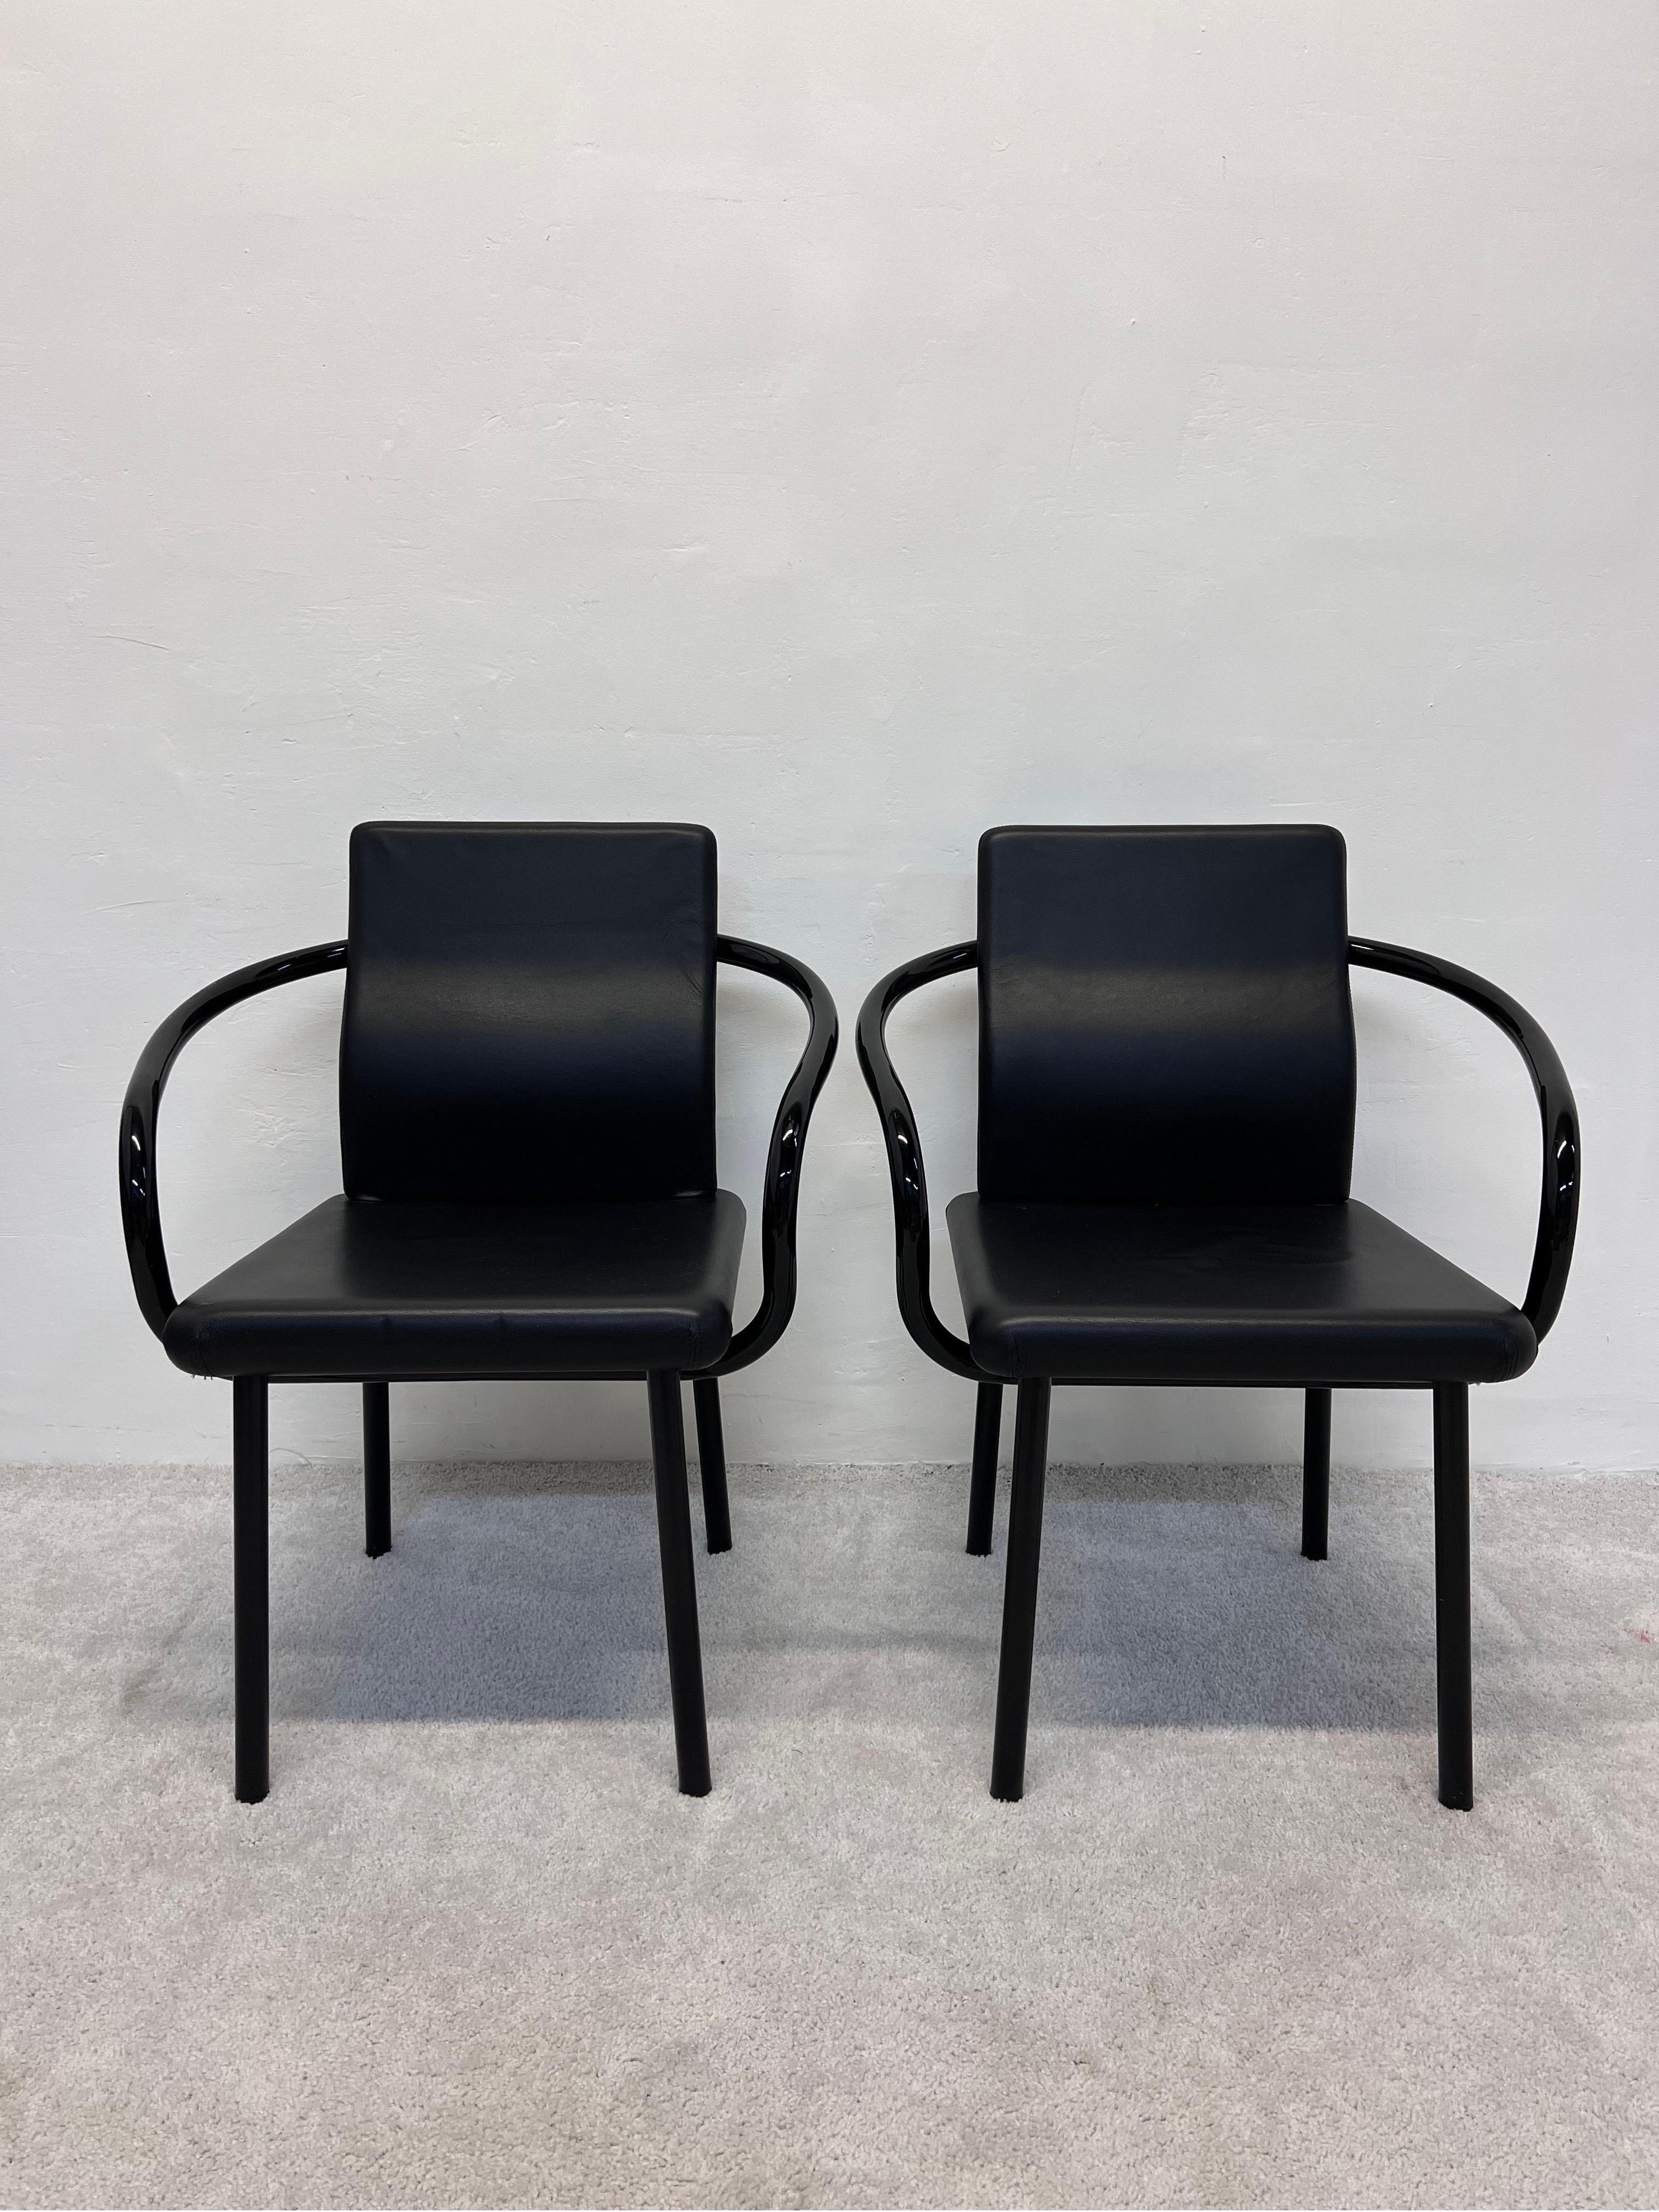 Memphis Postmodern Mandarin chairs rendered in black lacquered steel frame with black Naugahyde cushioned seats designed by Ettore Sottsass for Knoll.